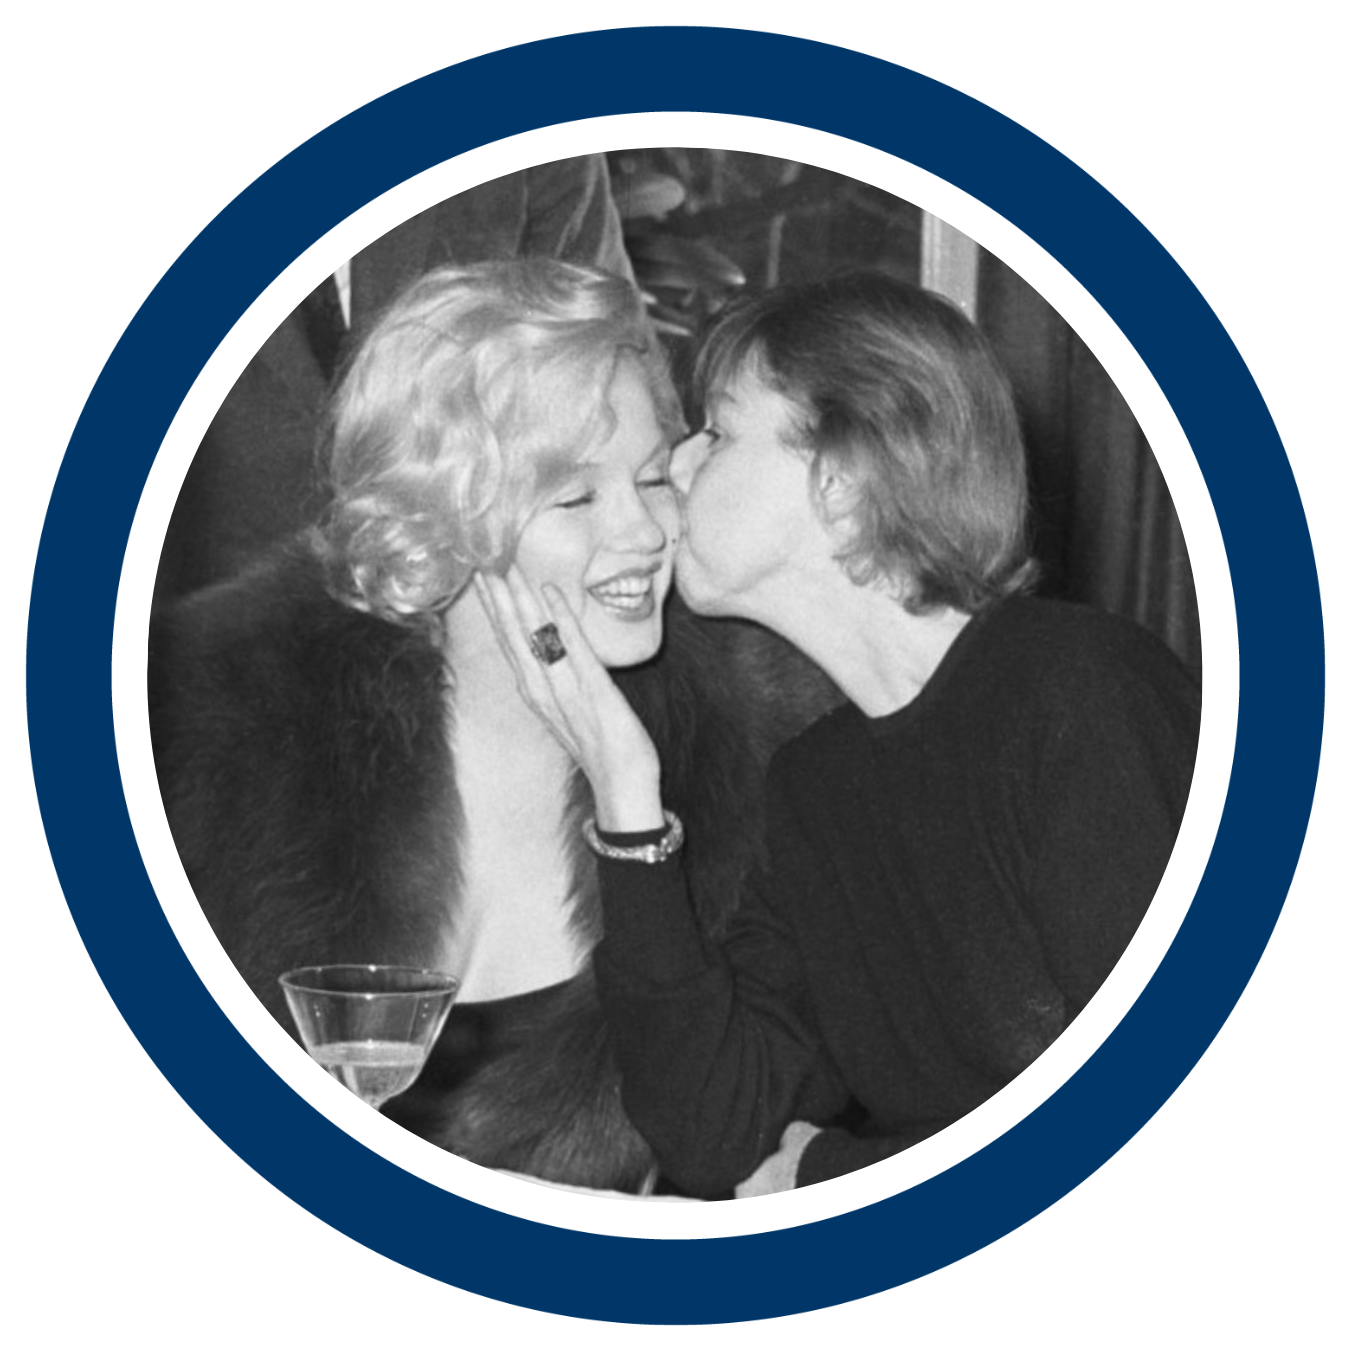 Carson McCullers with Marilyn Monroe